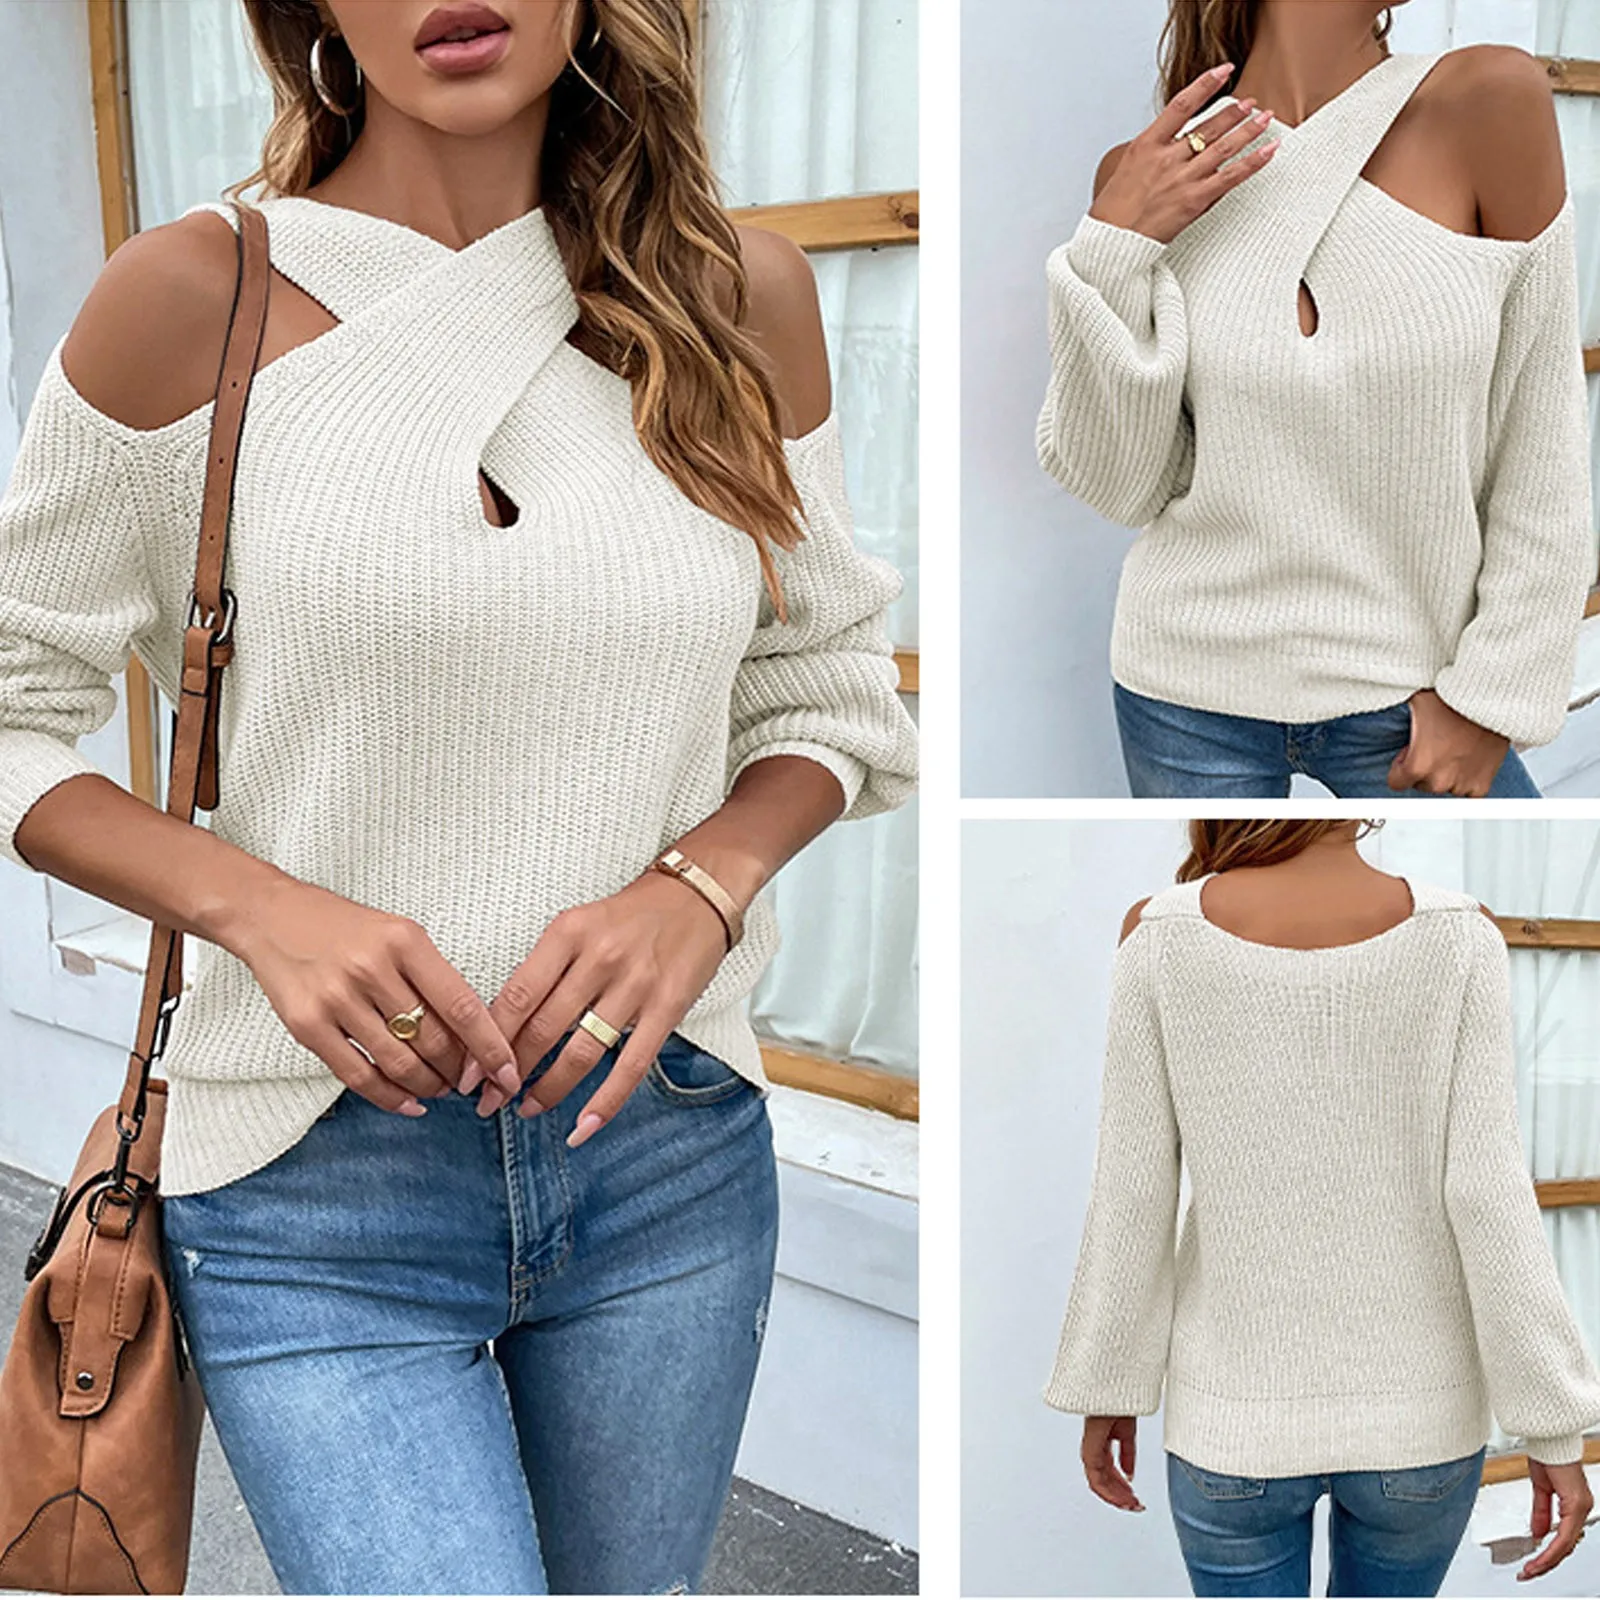 Women's Fall Sweaters Solid Color Cross Halter Shoulder Sleeve Knitted Sweater Lantern Sweater Fashion